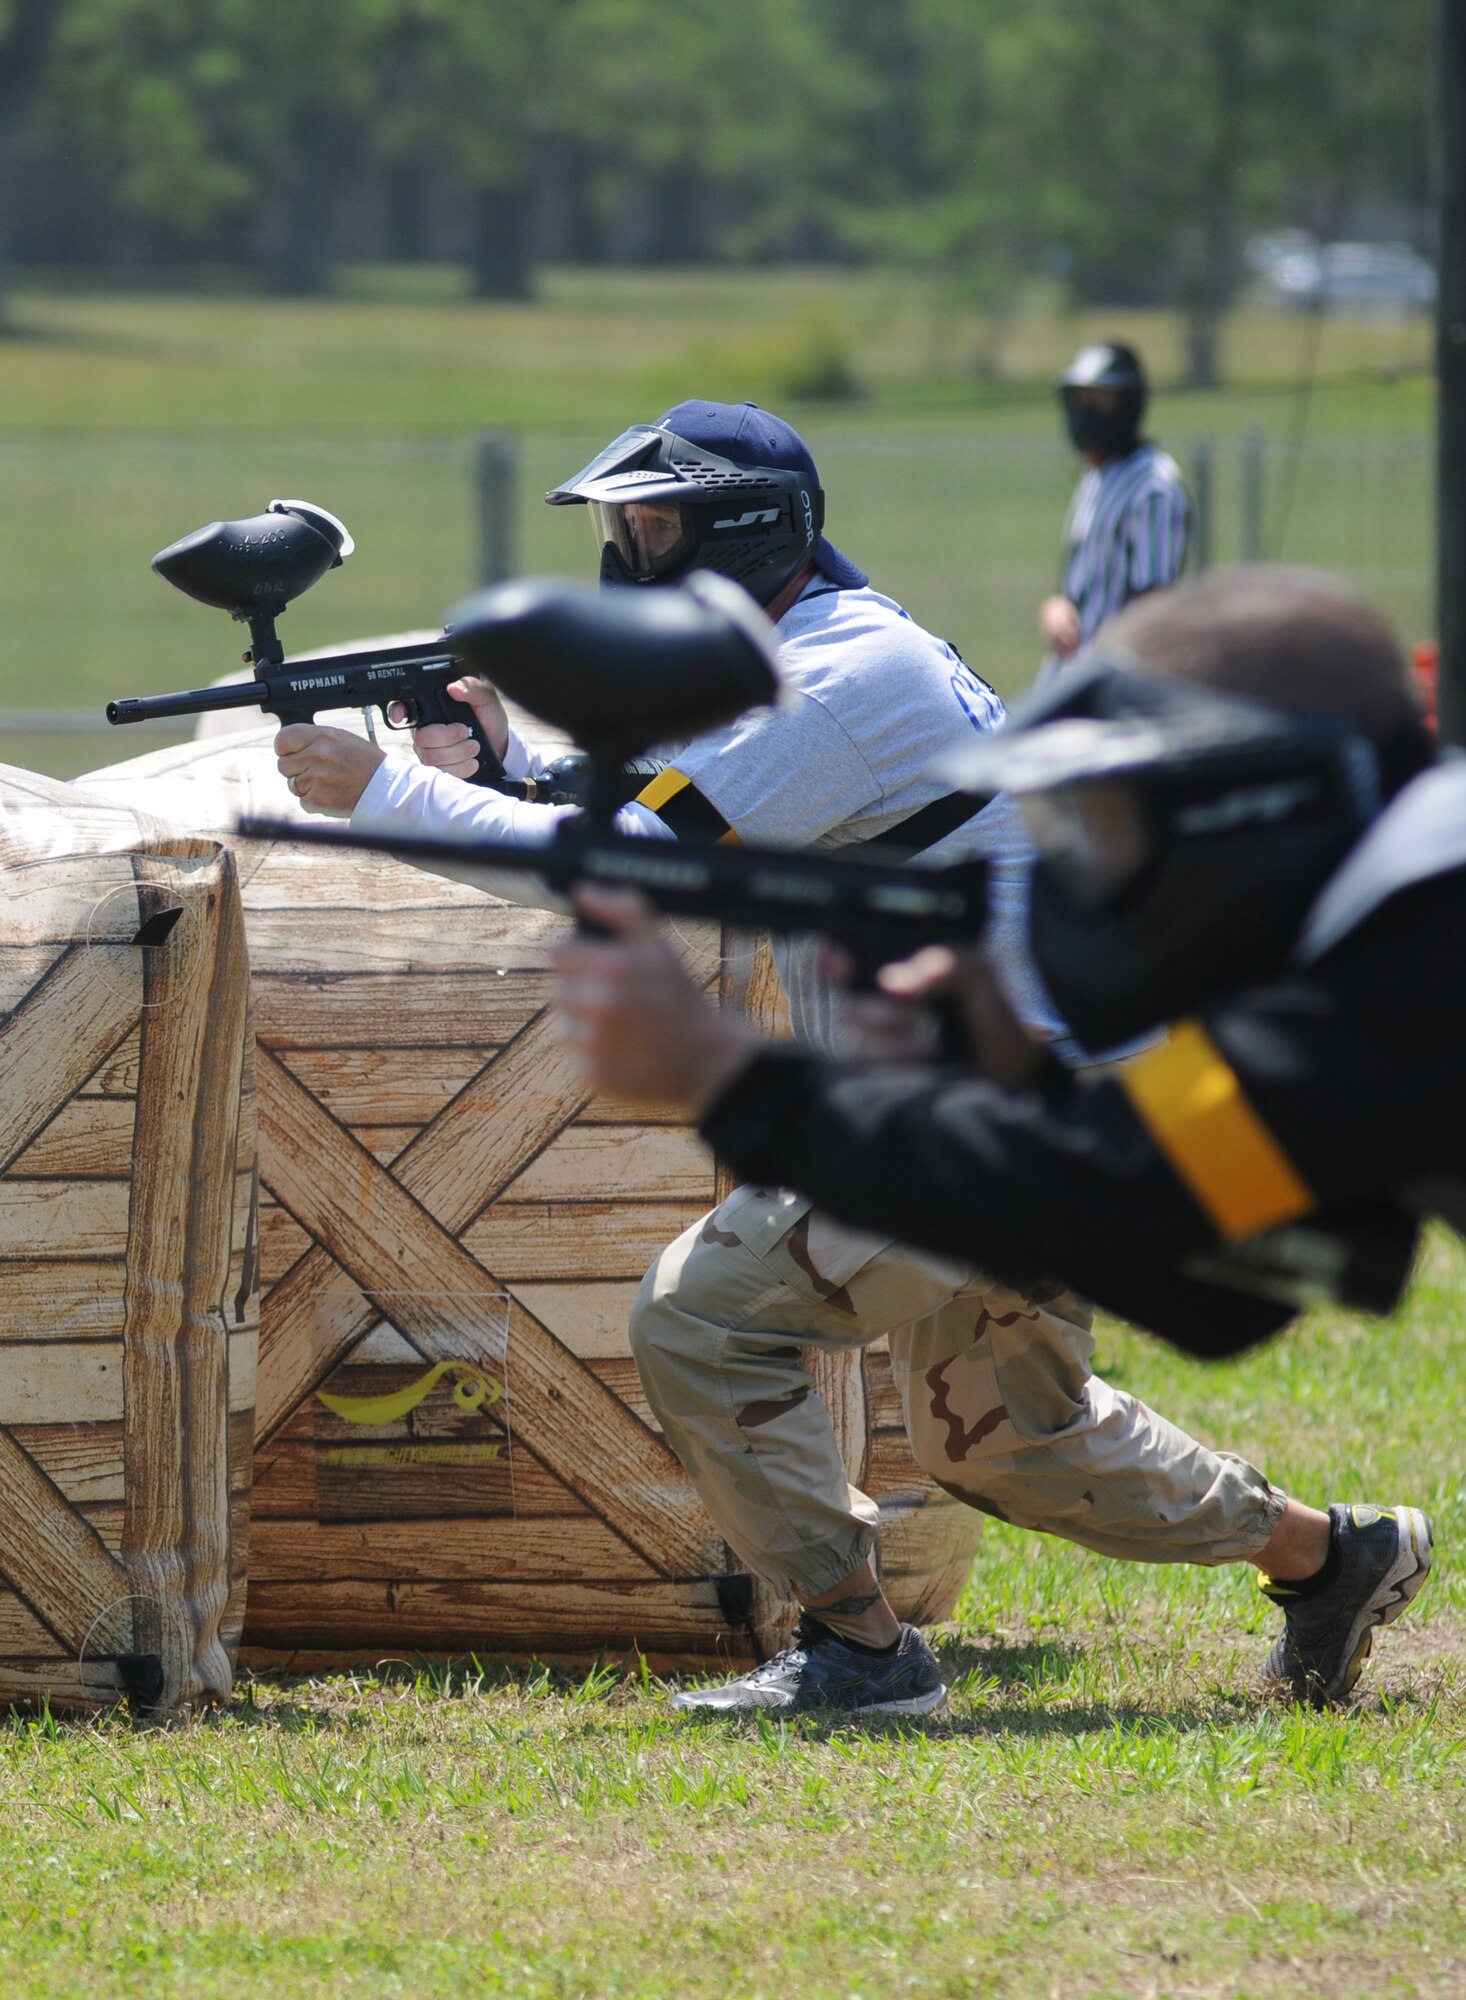 Chief Master Sgts. Mike Lemond, 2nd Air Force, and Chief Master Sgt. Jason Devereaux, 81st Aerospace Medicine Squadron, close in on the enemy during a friendly match between the Chiefs and the Colonels at the paintball facility grand opening April 25, 2014, southeast of the commissary at Keesler Air Force Base, Miss.  The paintball facility was funded with a portion of the 2013 Commander-in-Chief Installation Excellence award funds.  (U.S. Air Force photo by Kemberly Groue)